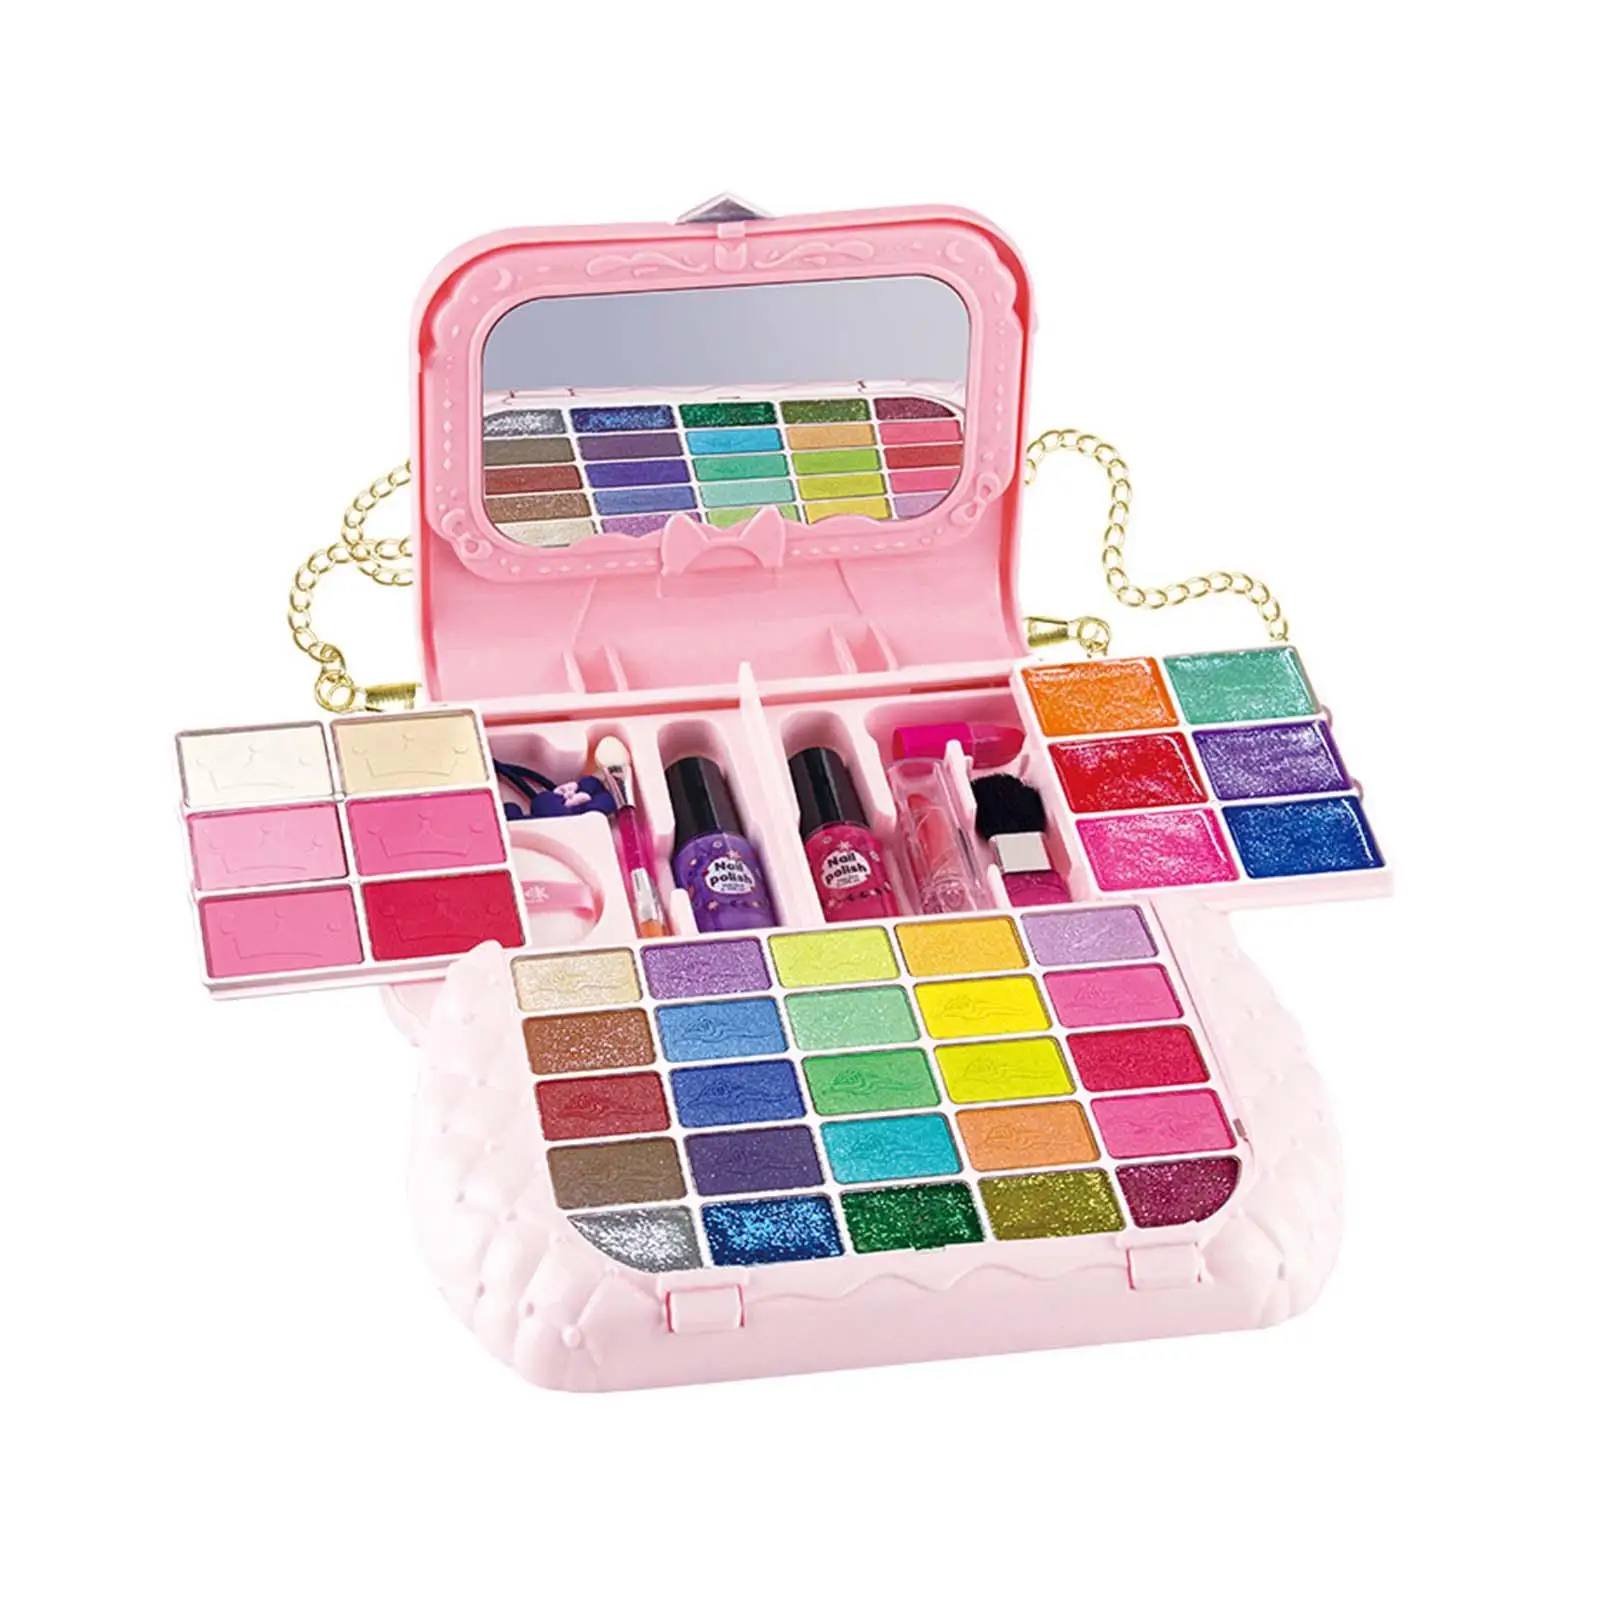 Makeup Toy Kits Role Playing with Cosmetic Case Washable Makeup Girls Toys for Age 3 4 5+ Toddlers Girls Present Gift Halloween